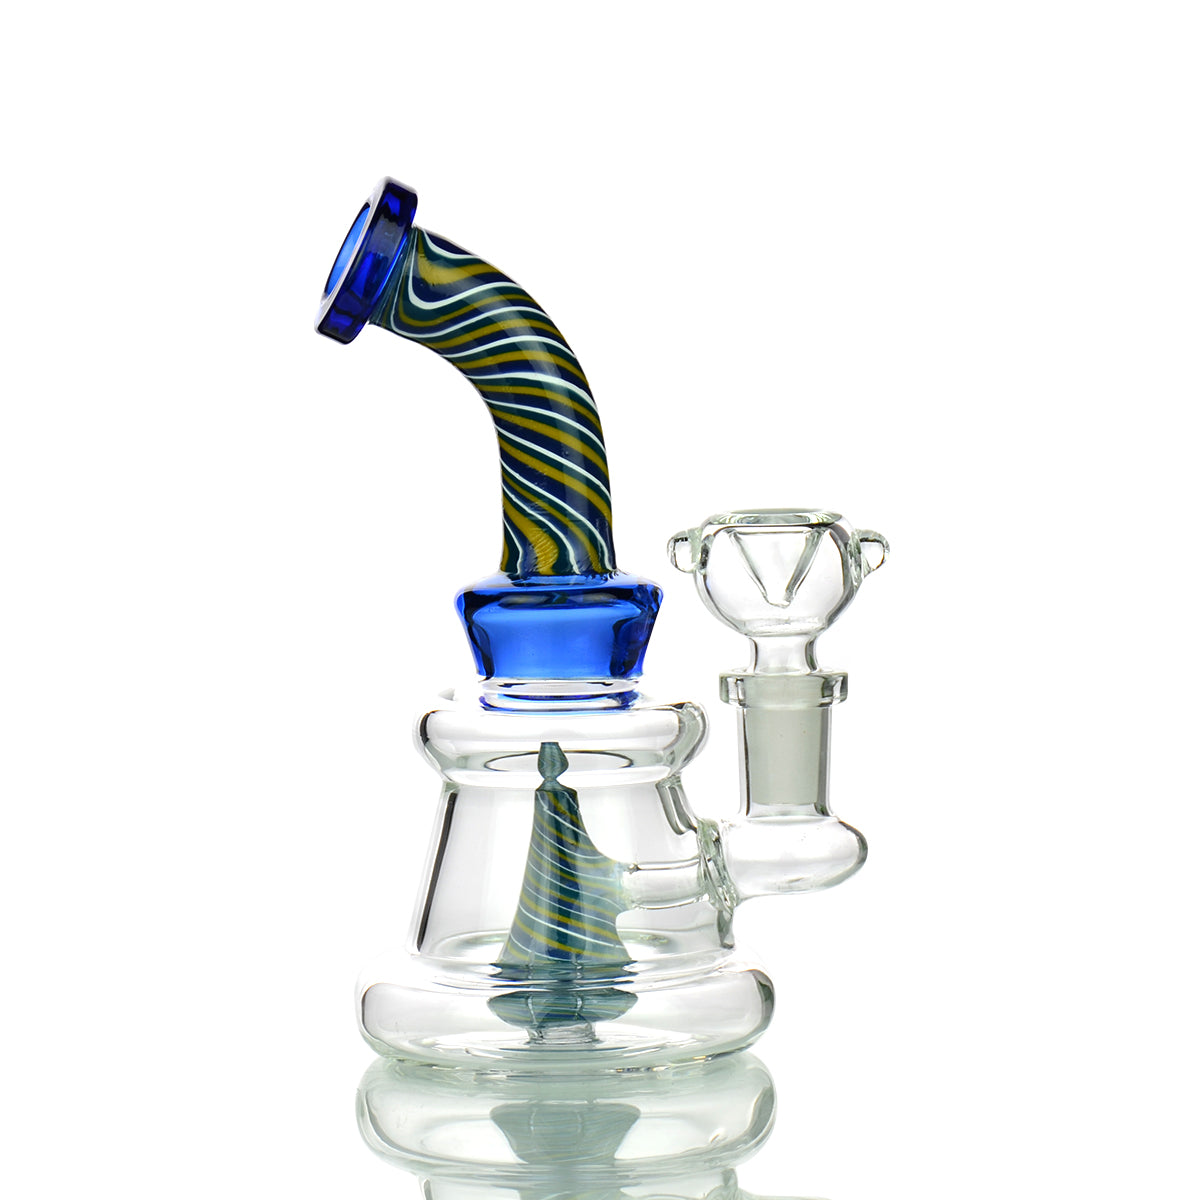 7" Twisted Reversal Art Bong with 14mm Male Bowl